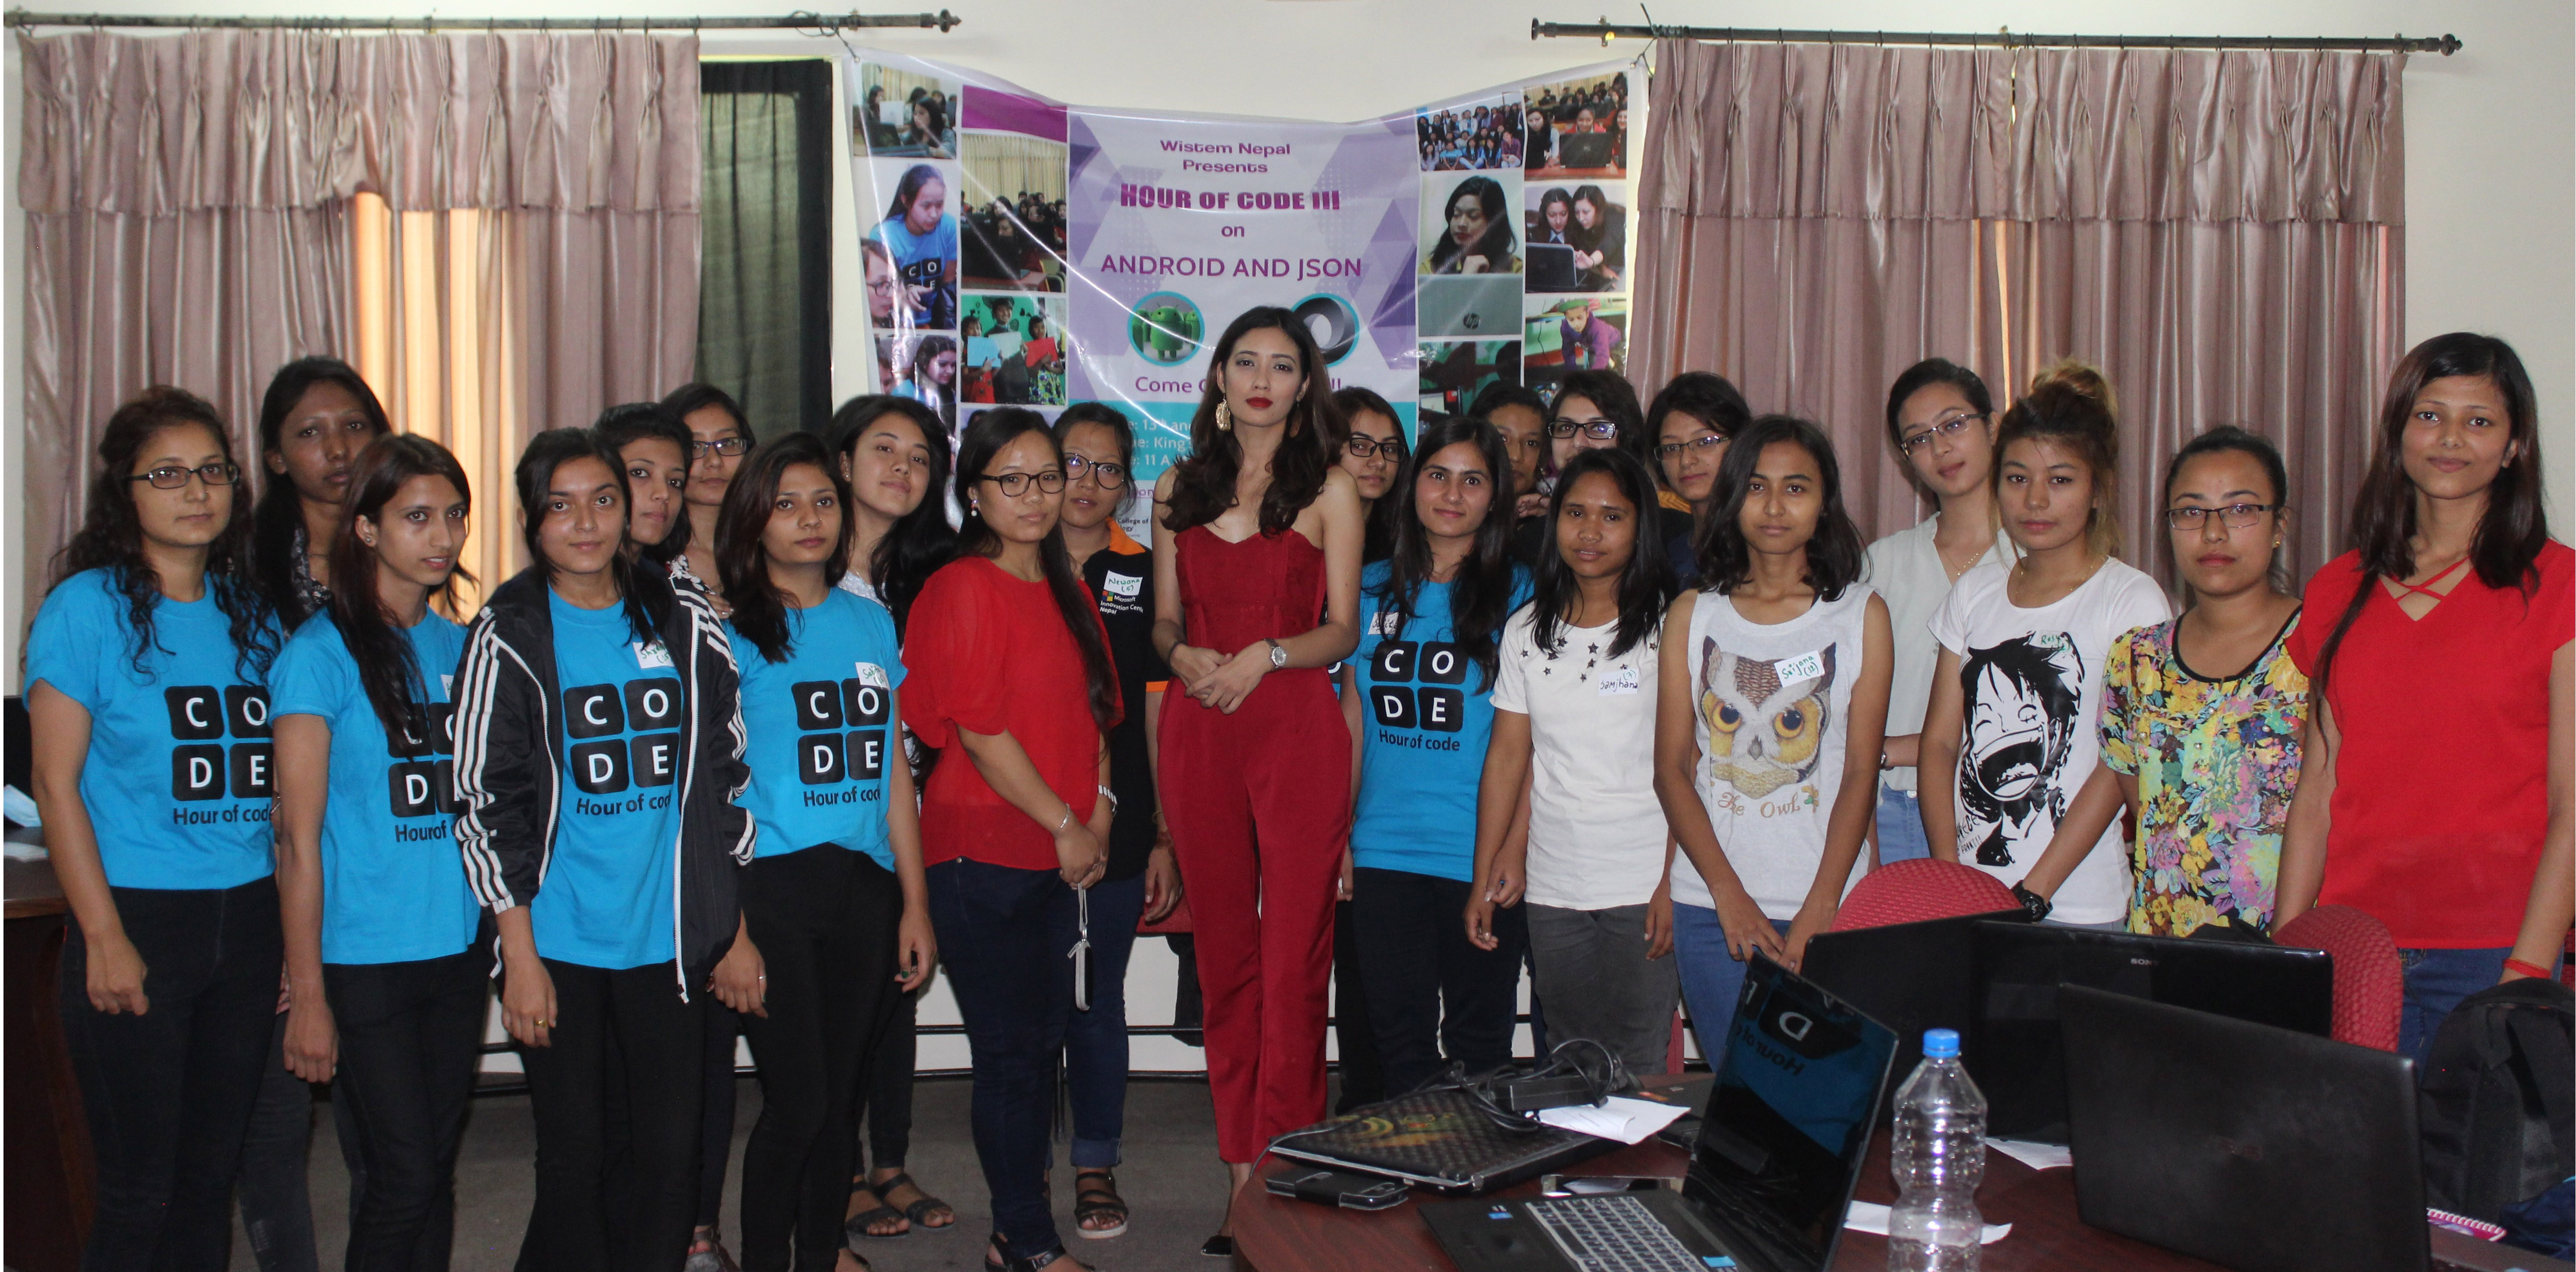 Hour of Code III – Android app development workshop for girls conducted successfully by WiSTEM